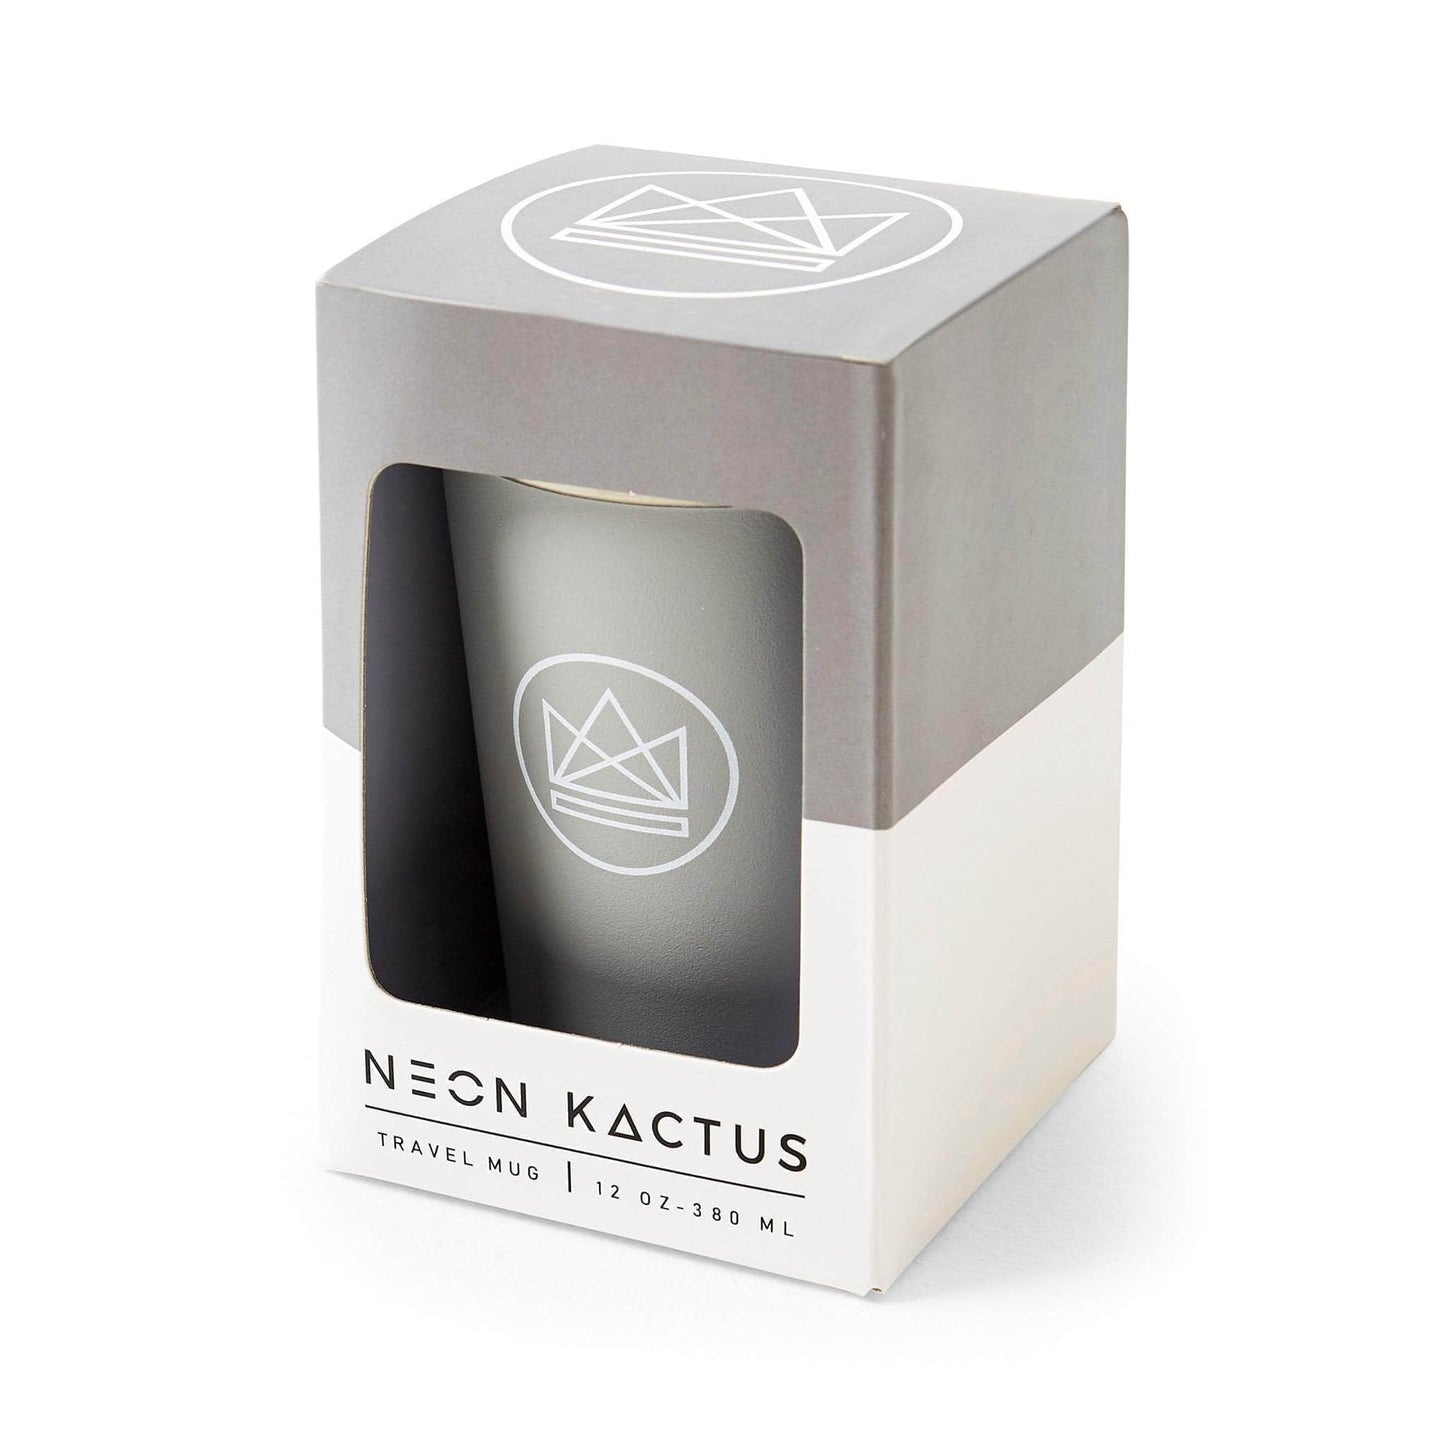 Neon Kactus Coffee Cup Stainless Steel Insulated Coffee Cup - 12oz - Forever Young Grey